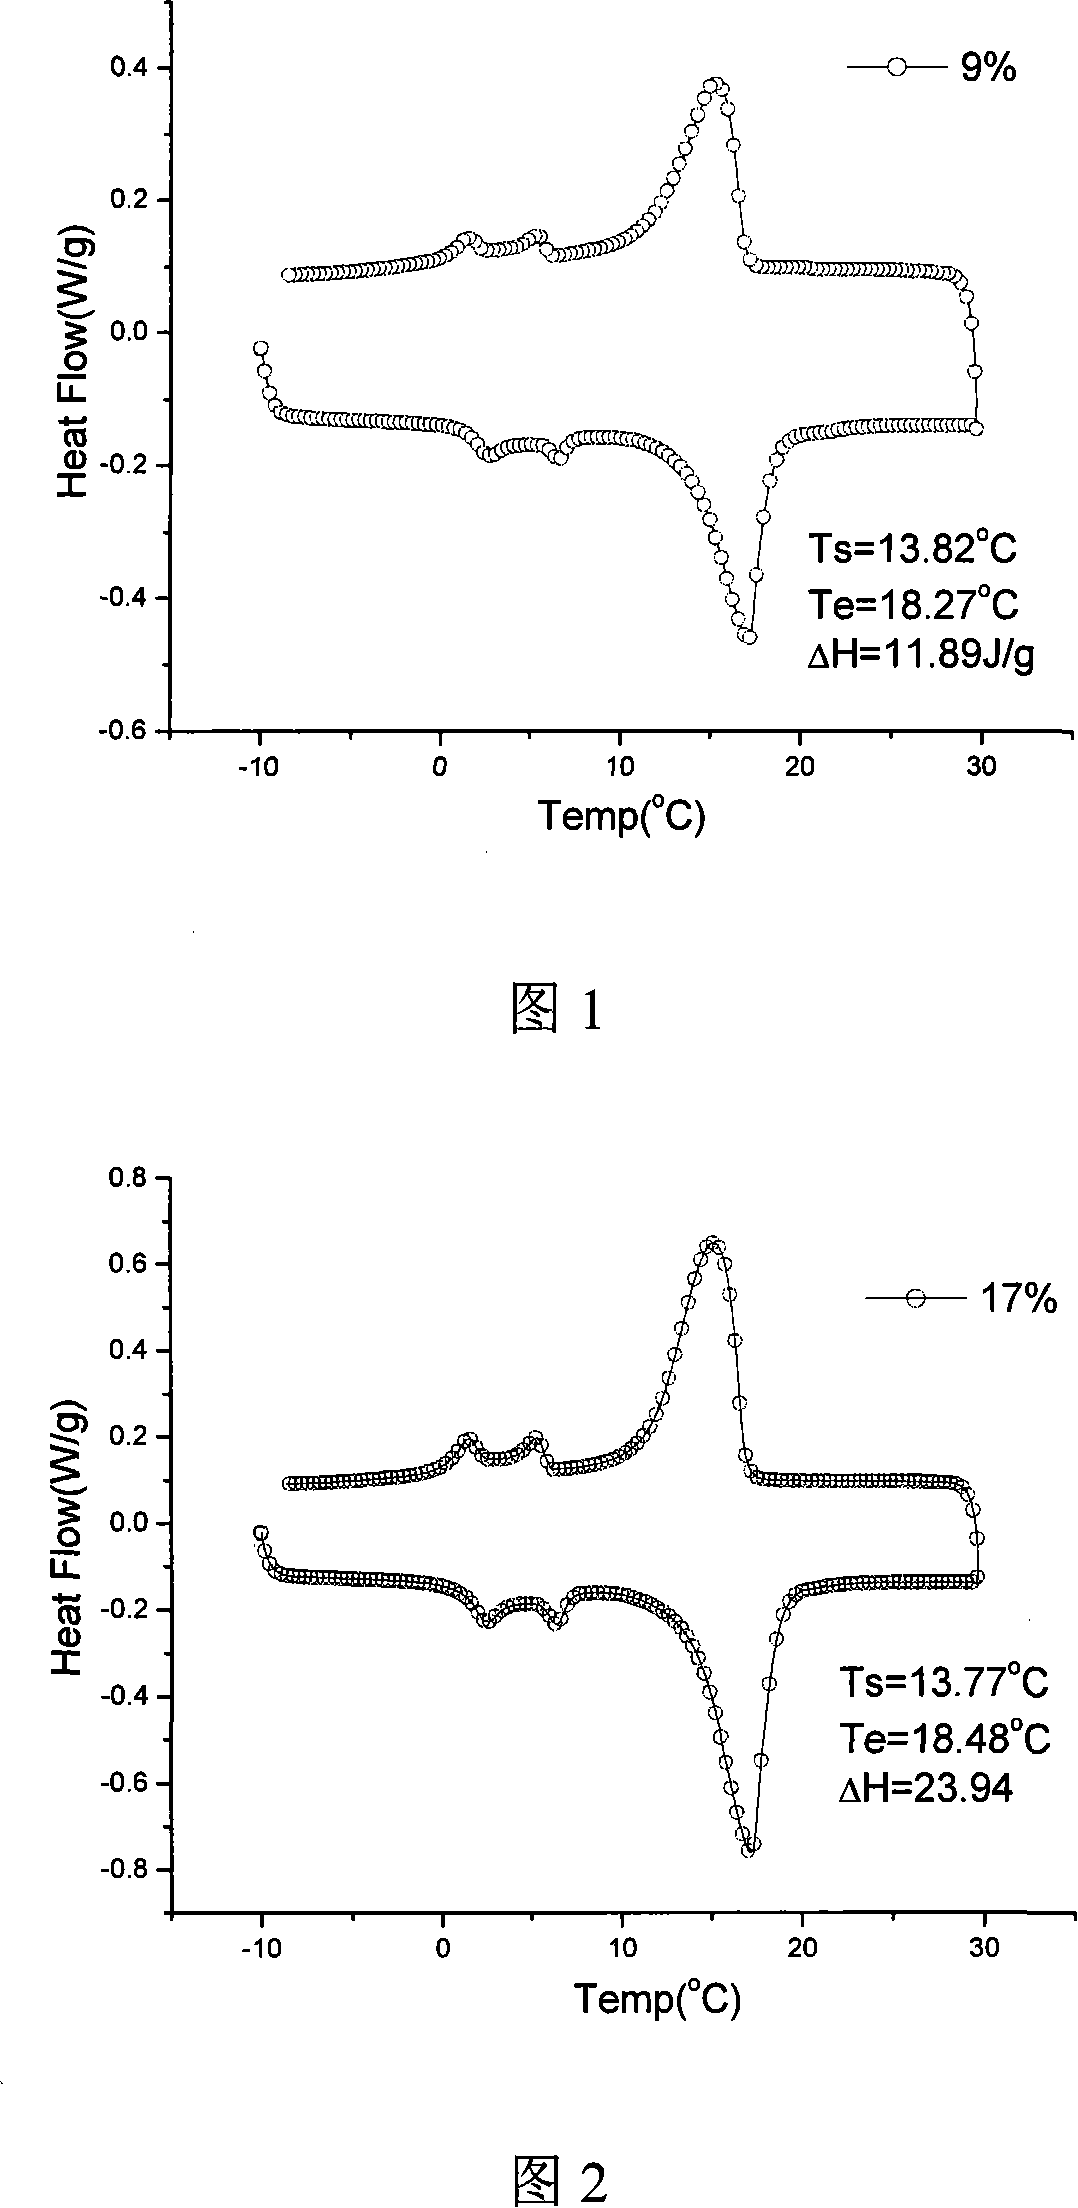 Phase-change energy-storage composite coating material and method for making same